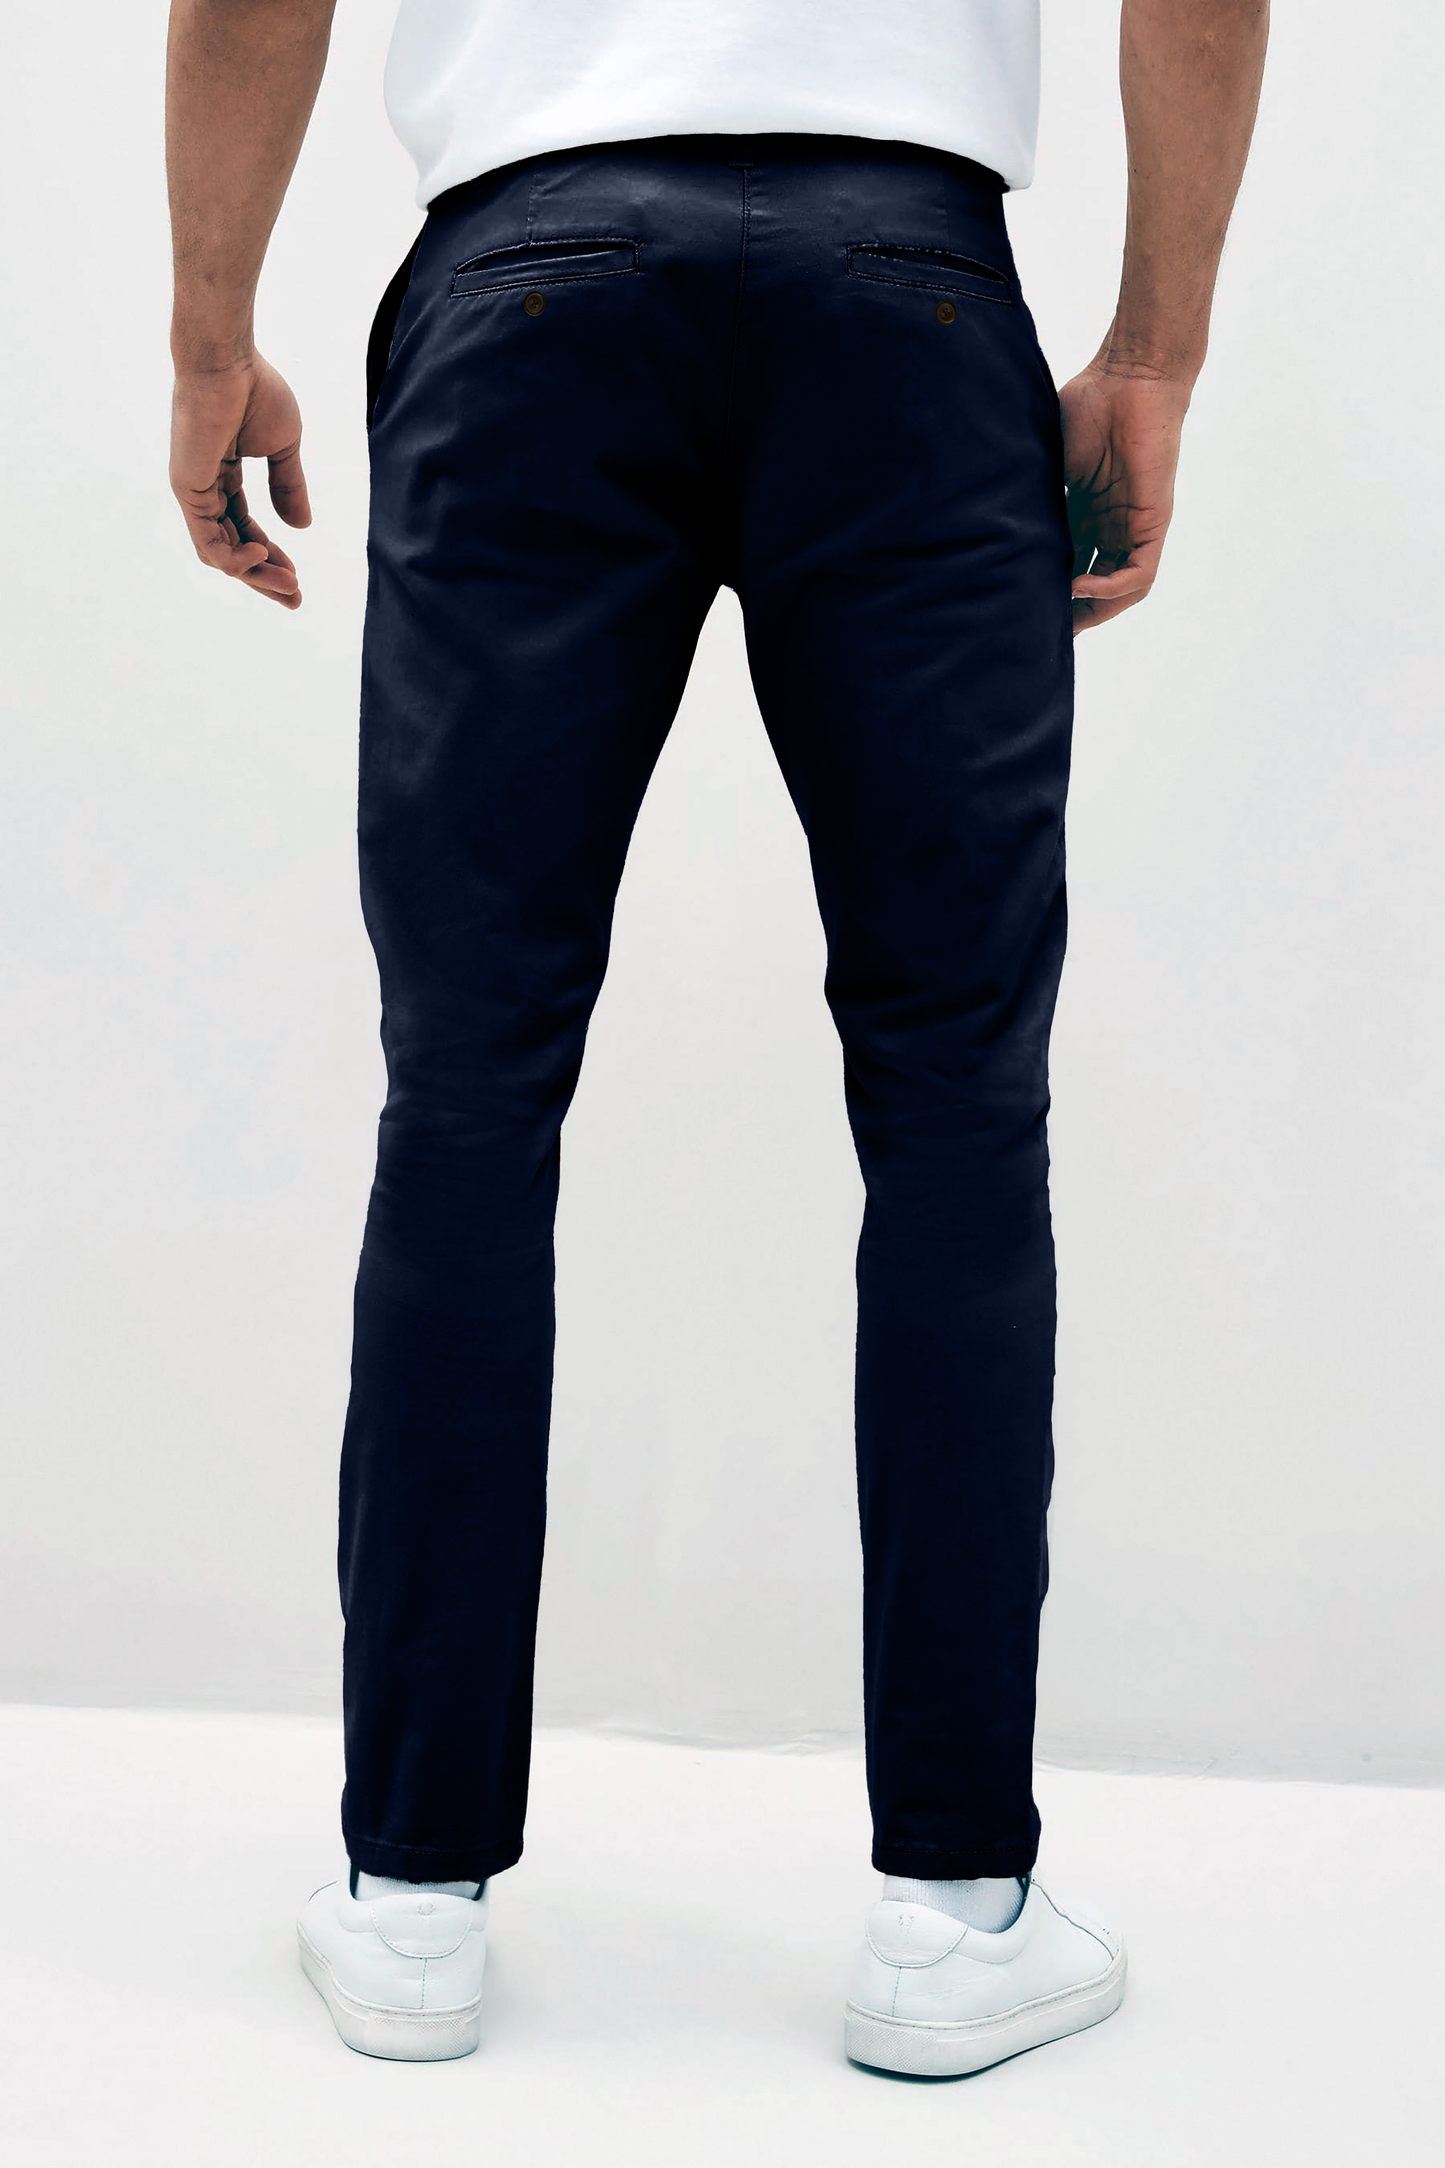 Mens Navy chinos with front slanted pockets, jetted back pockets. zip fly fastening and brown horne buttons on the waistband and back pockets, the fit is a slim fit, this is worn with a white tee and white unbranded trainers